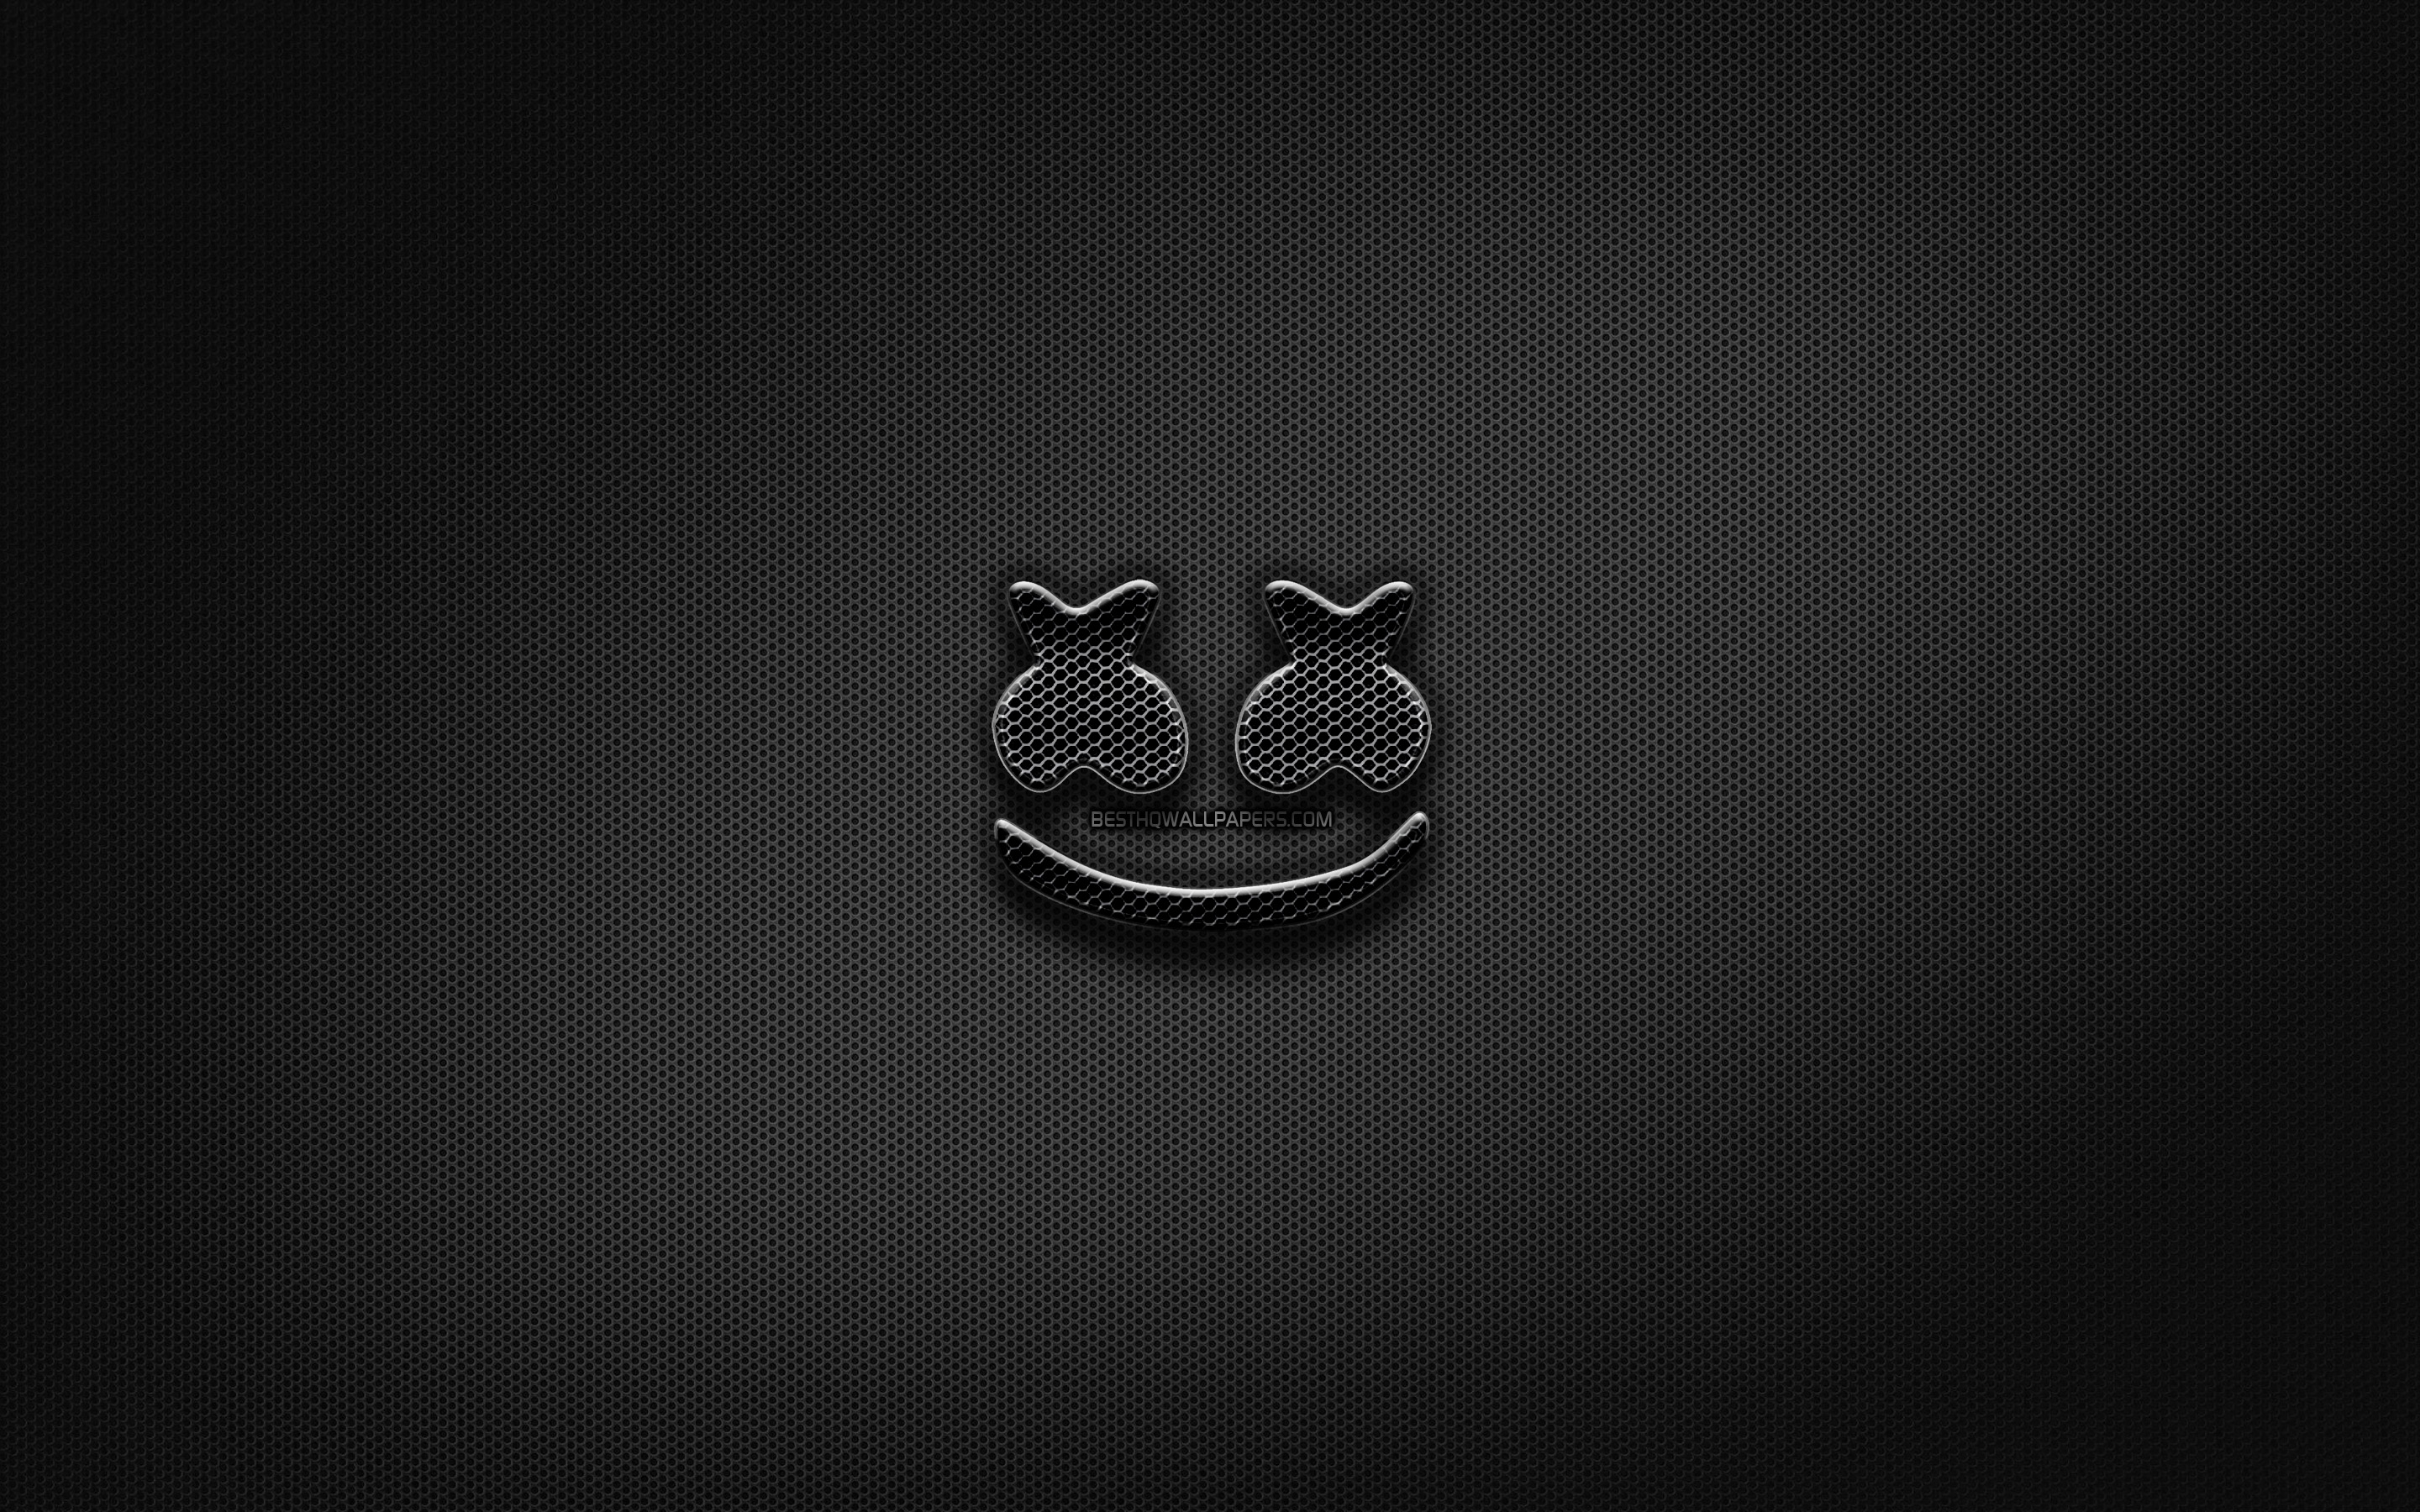 Download wallpapers dj marshmello black logo superstars creative metal grid background dj marshmello logo music stars dj marshmello for desktop with resolution x high quality hd pictures wallpapers